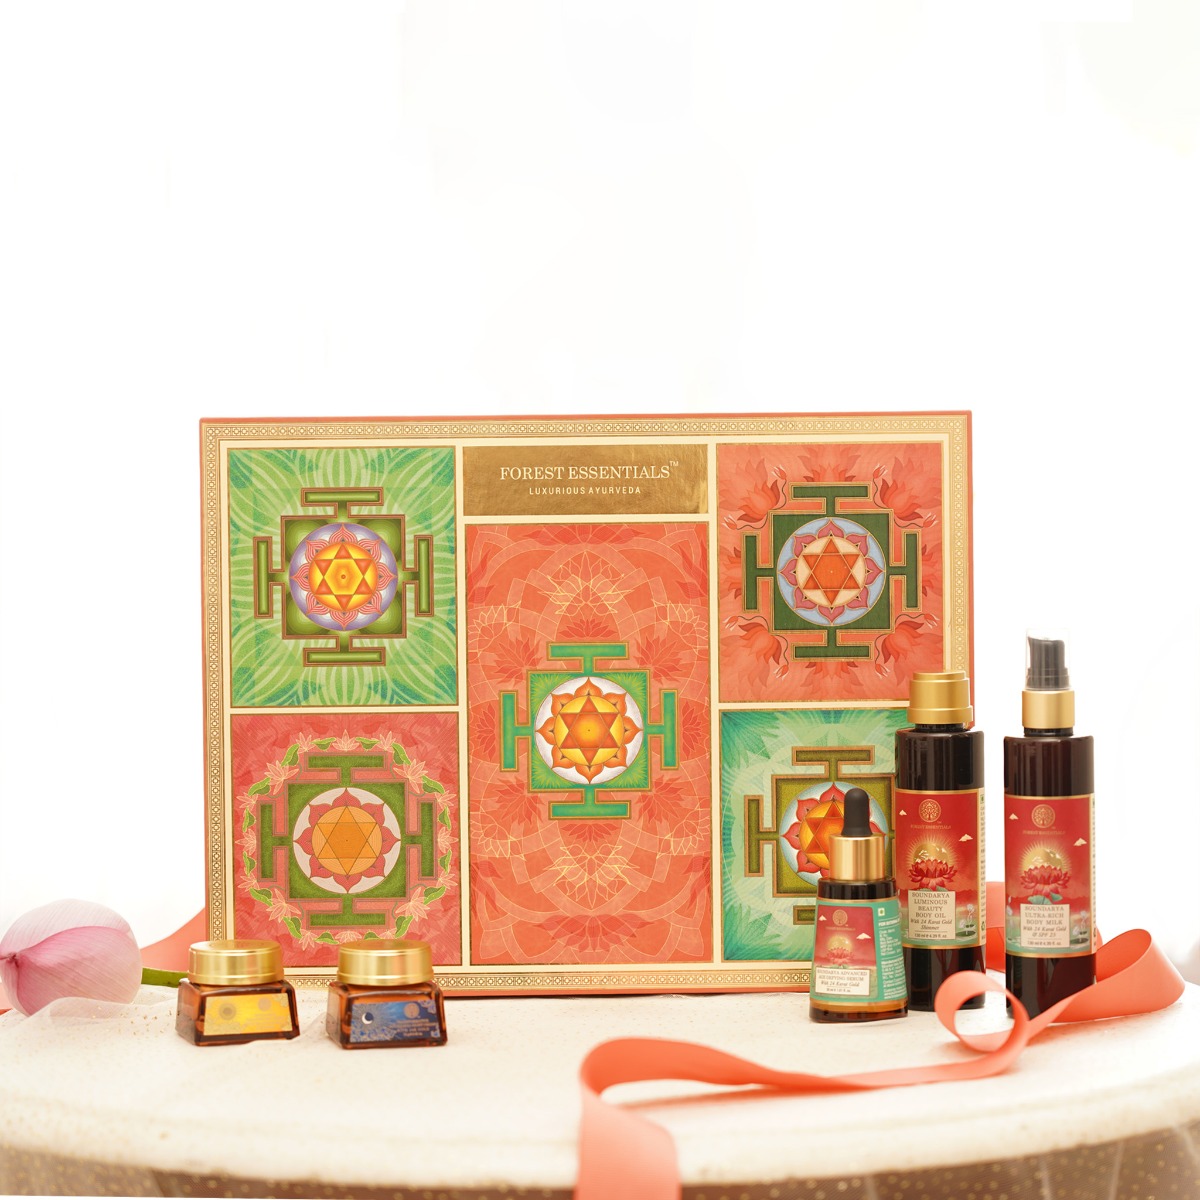 The Ultimate Diwali Gifting Guide For Beauty Lovers | Femina.in